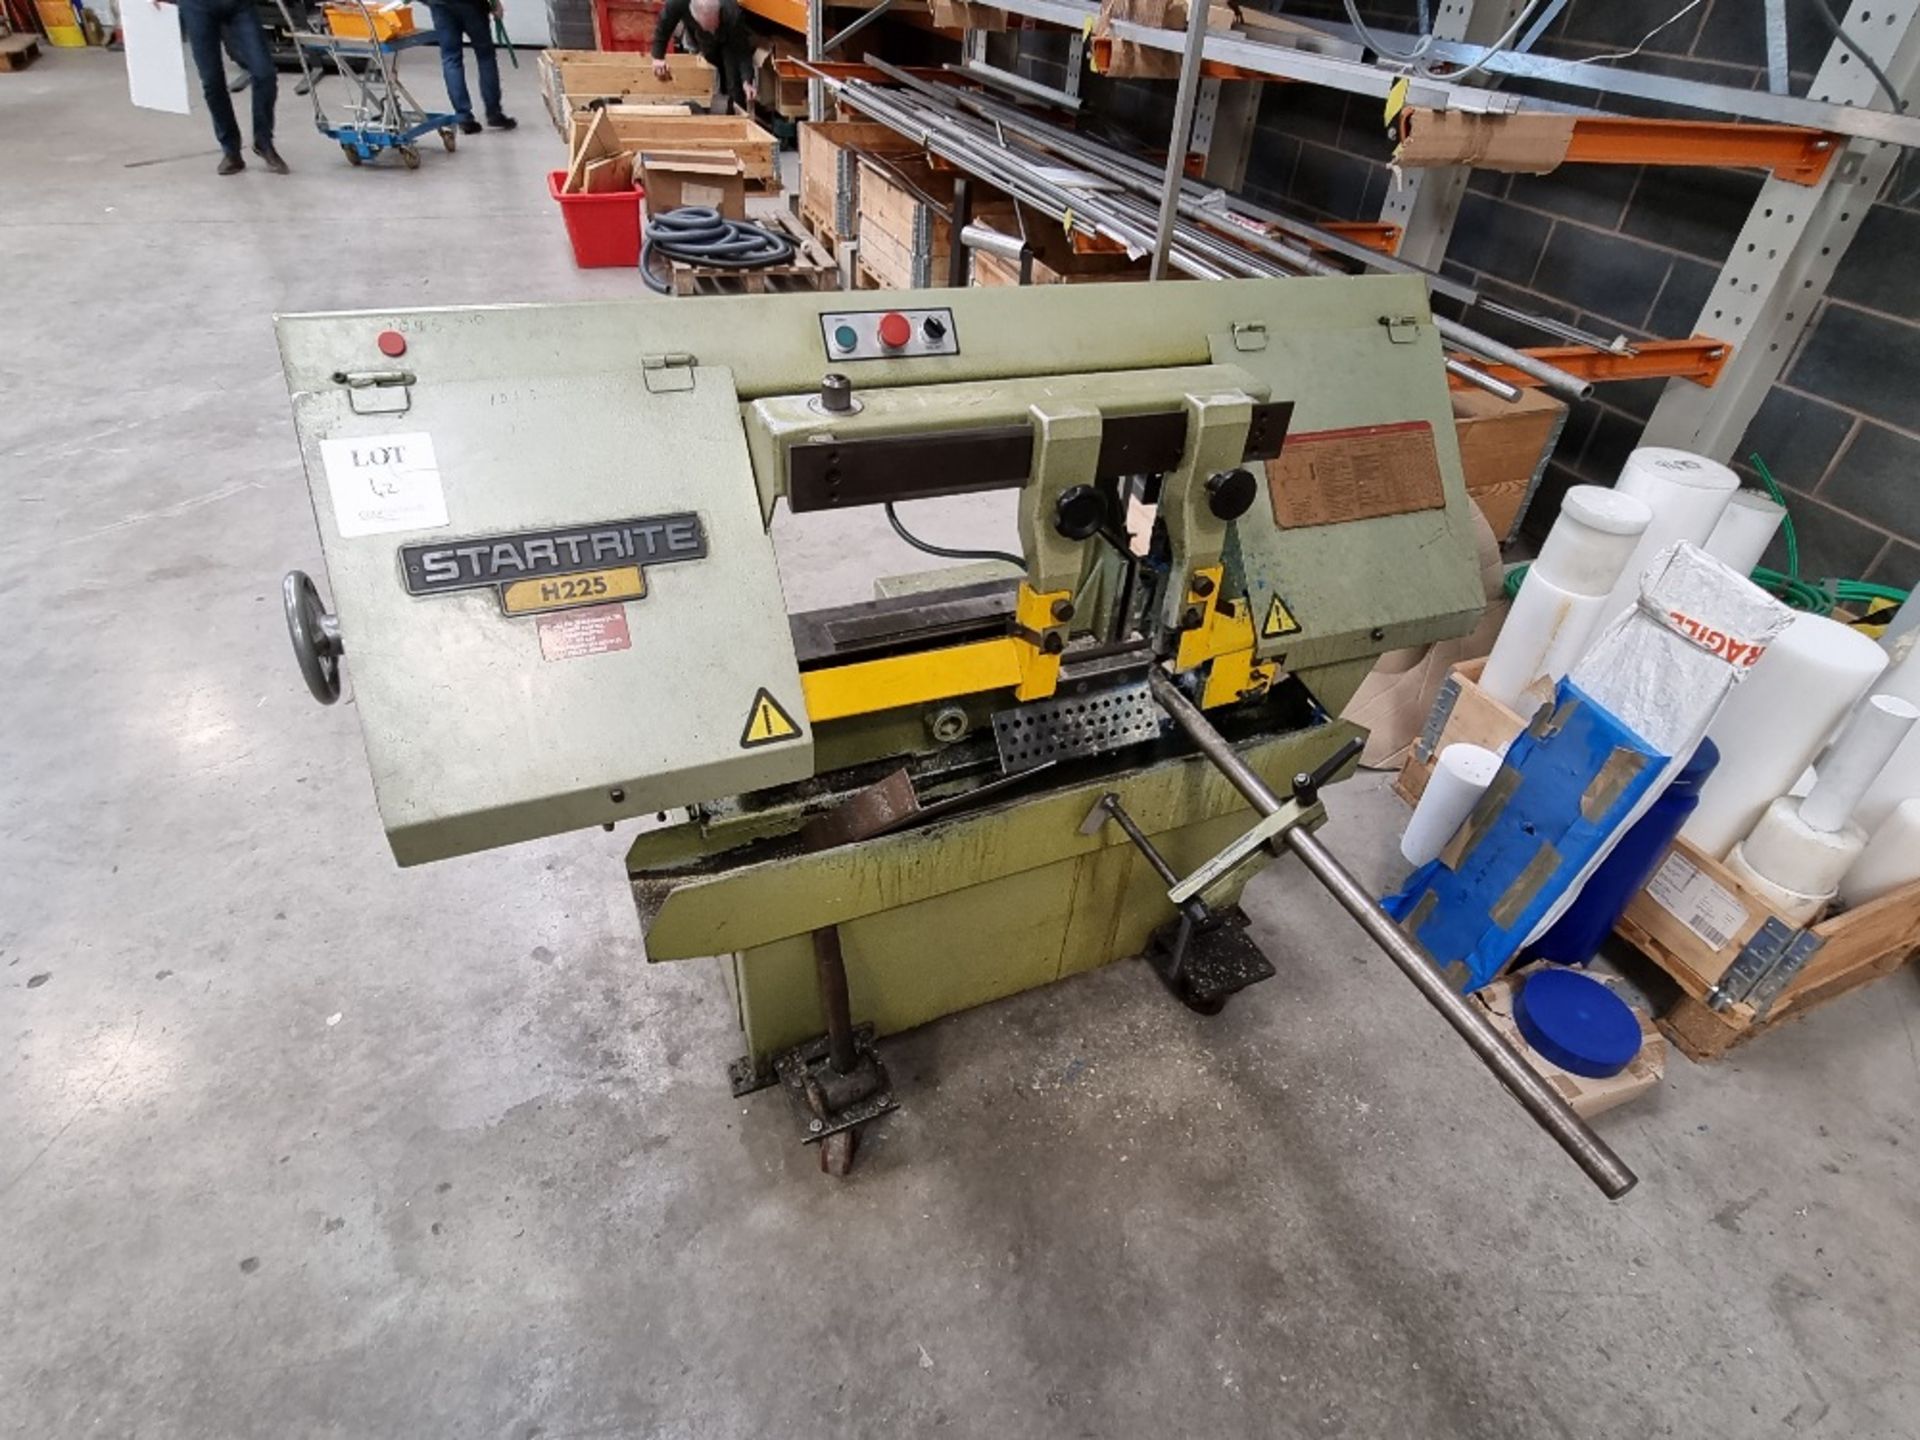 Startrite H225W horizontal band saw with 2 - roller stands. Serial No. 116607 (Method statement